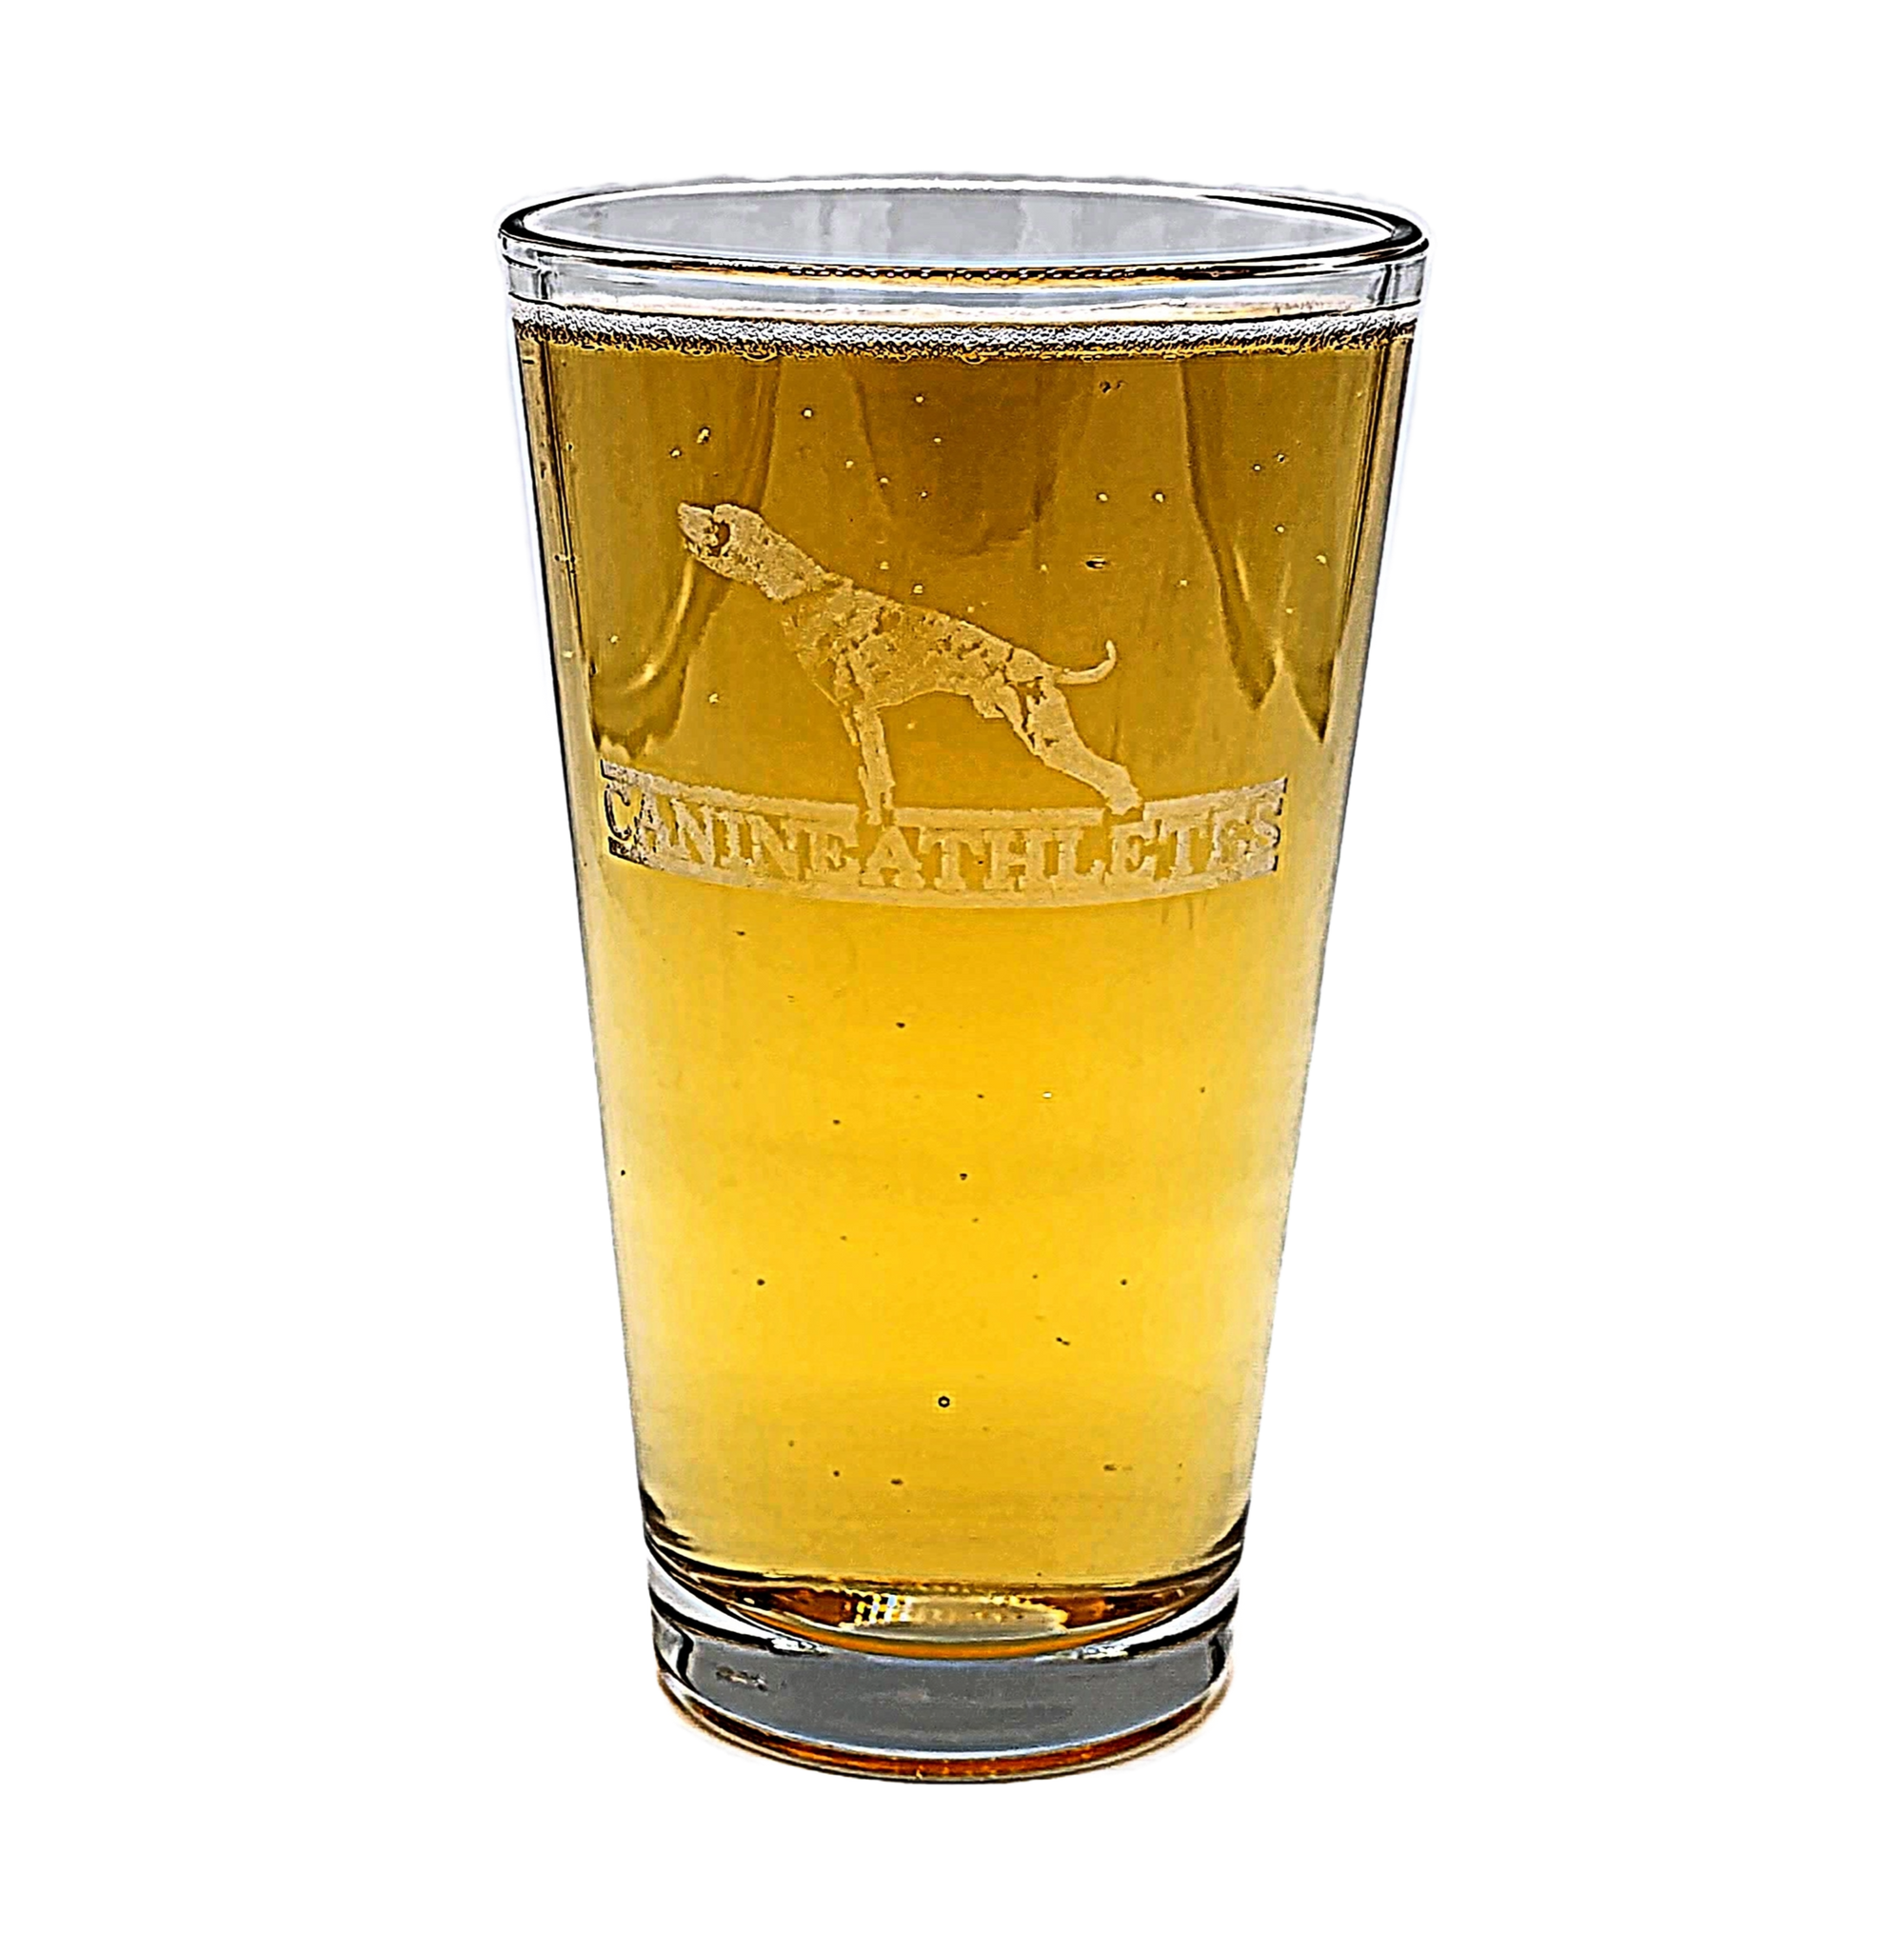 canine-athletes-beer-pint-glass